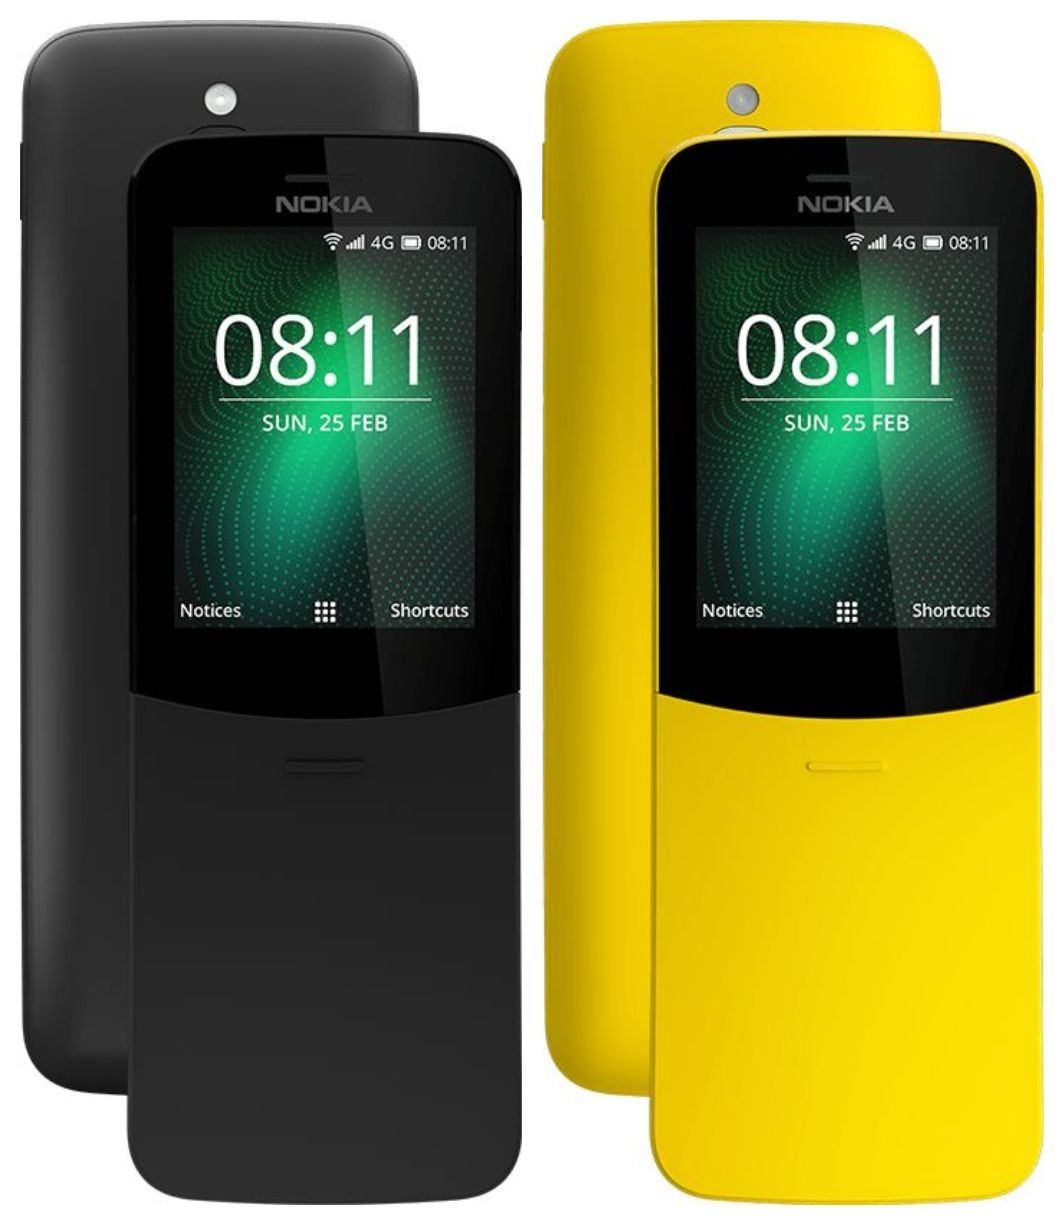 Nokia 8110 4G: Advantages and Disadvantages of the Model